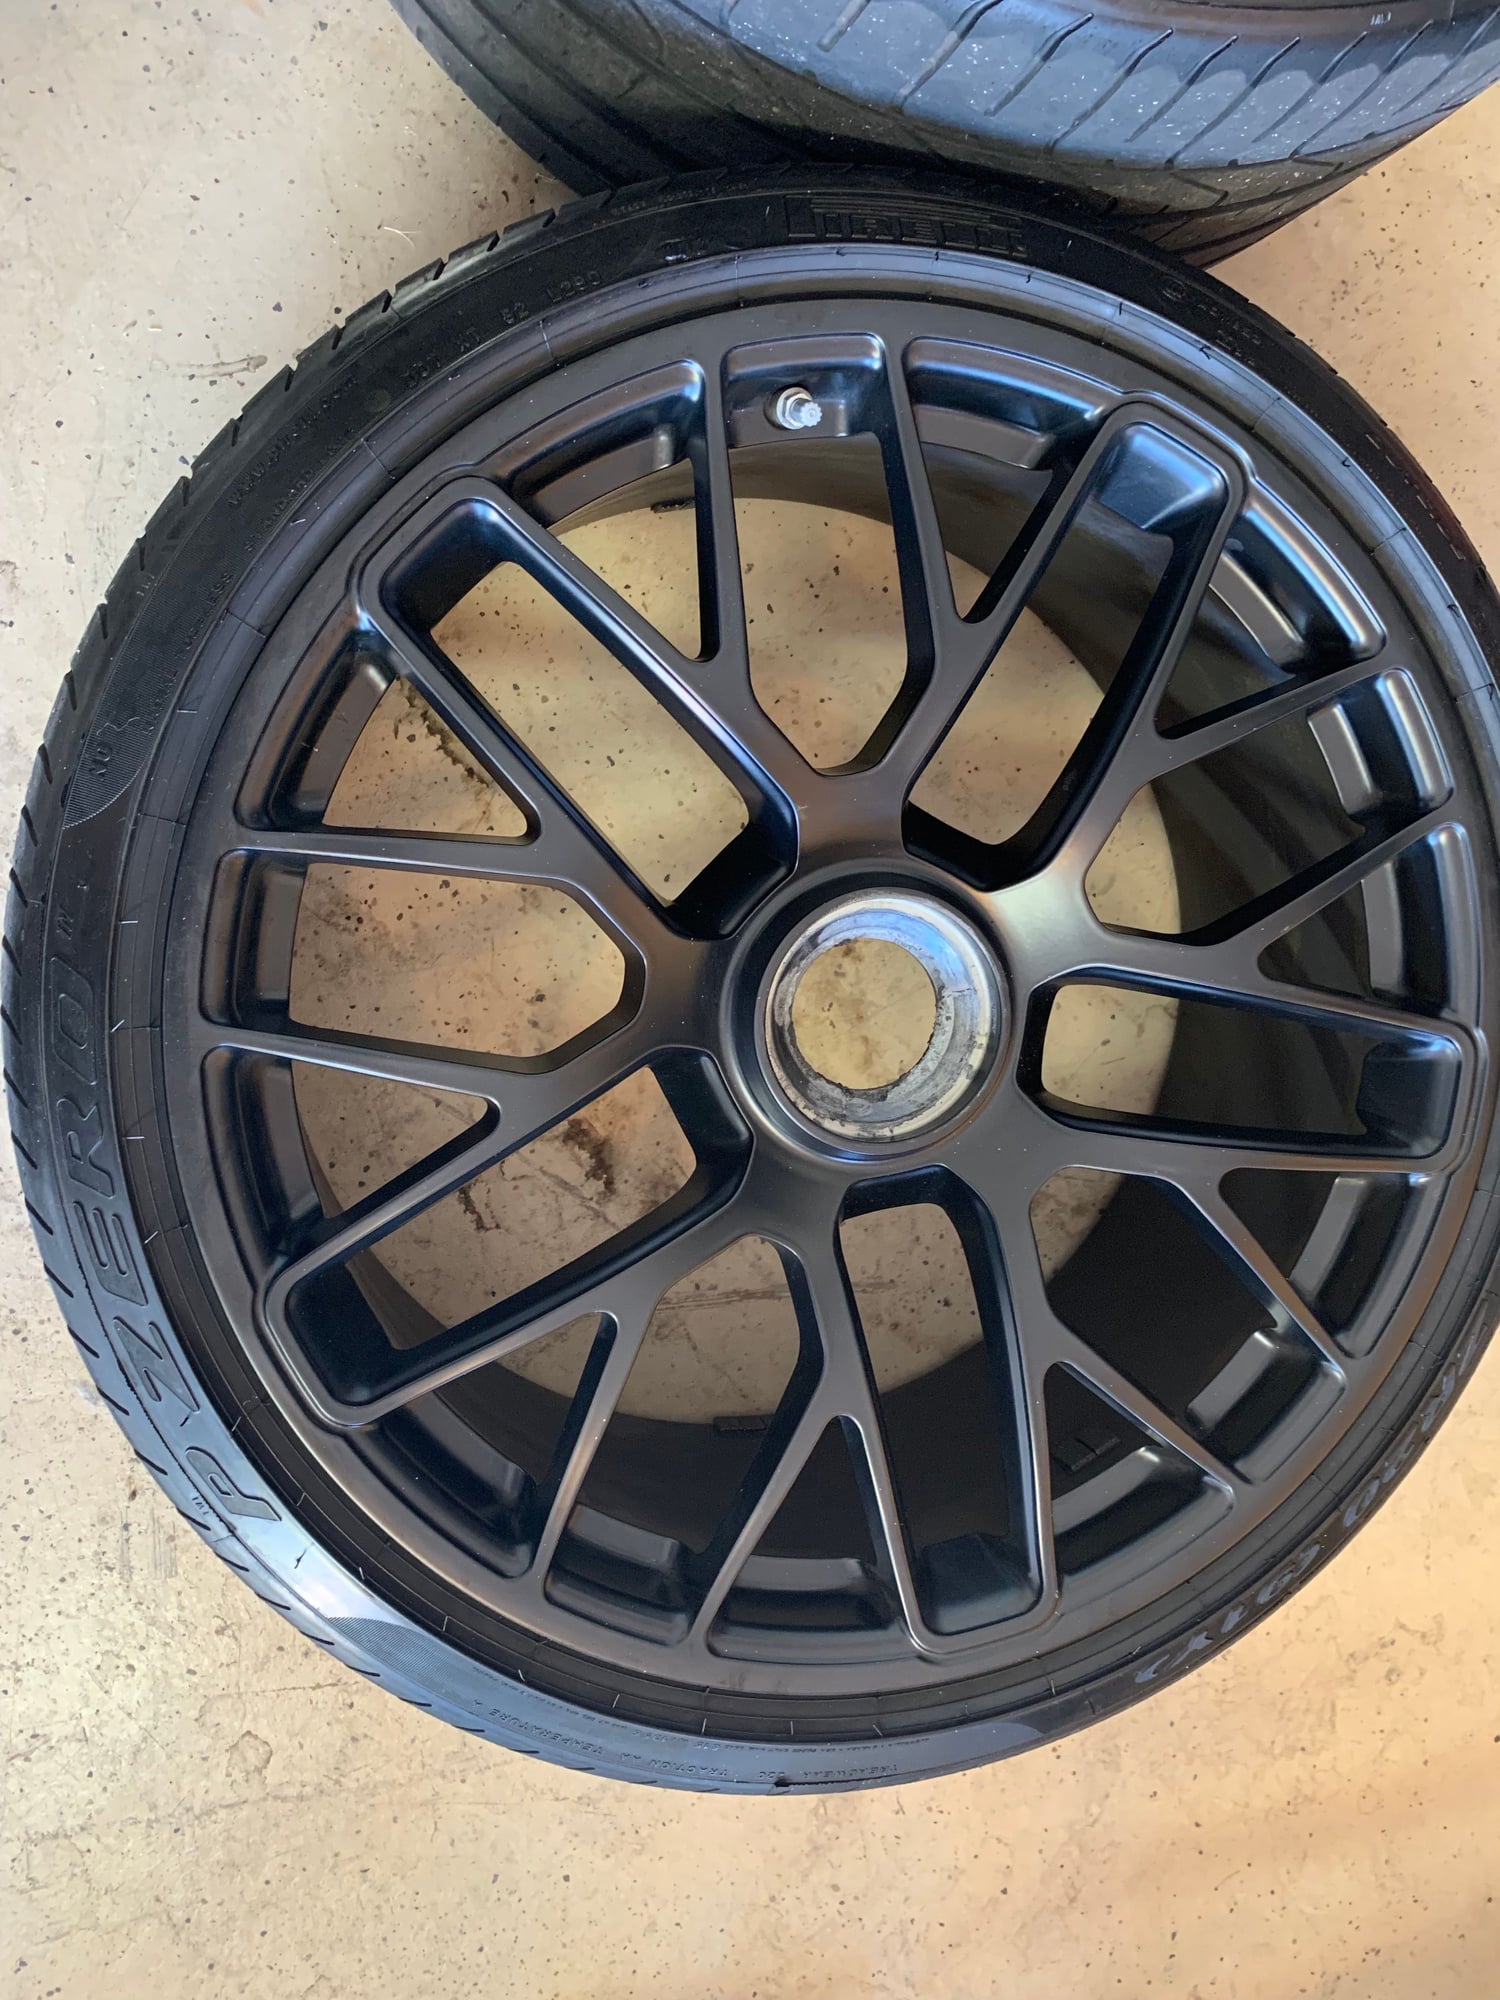 Wheels and Tires/Axles - 991 Turbo S Wheels finished in matte black w/ Tires - Used - 2014 to 2018 Porsche 911 - Scottsdale, AZ 85258, United States